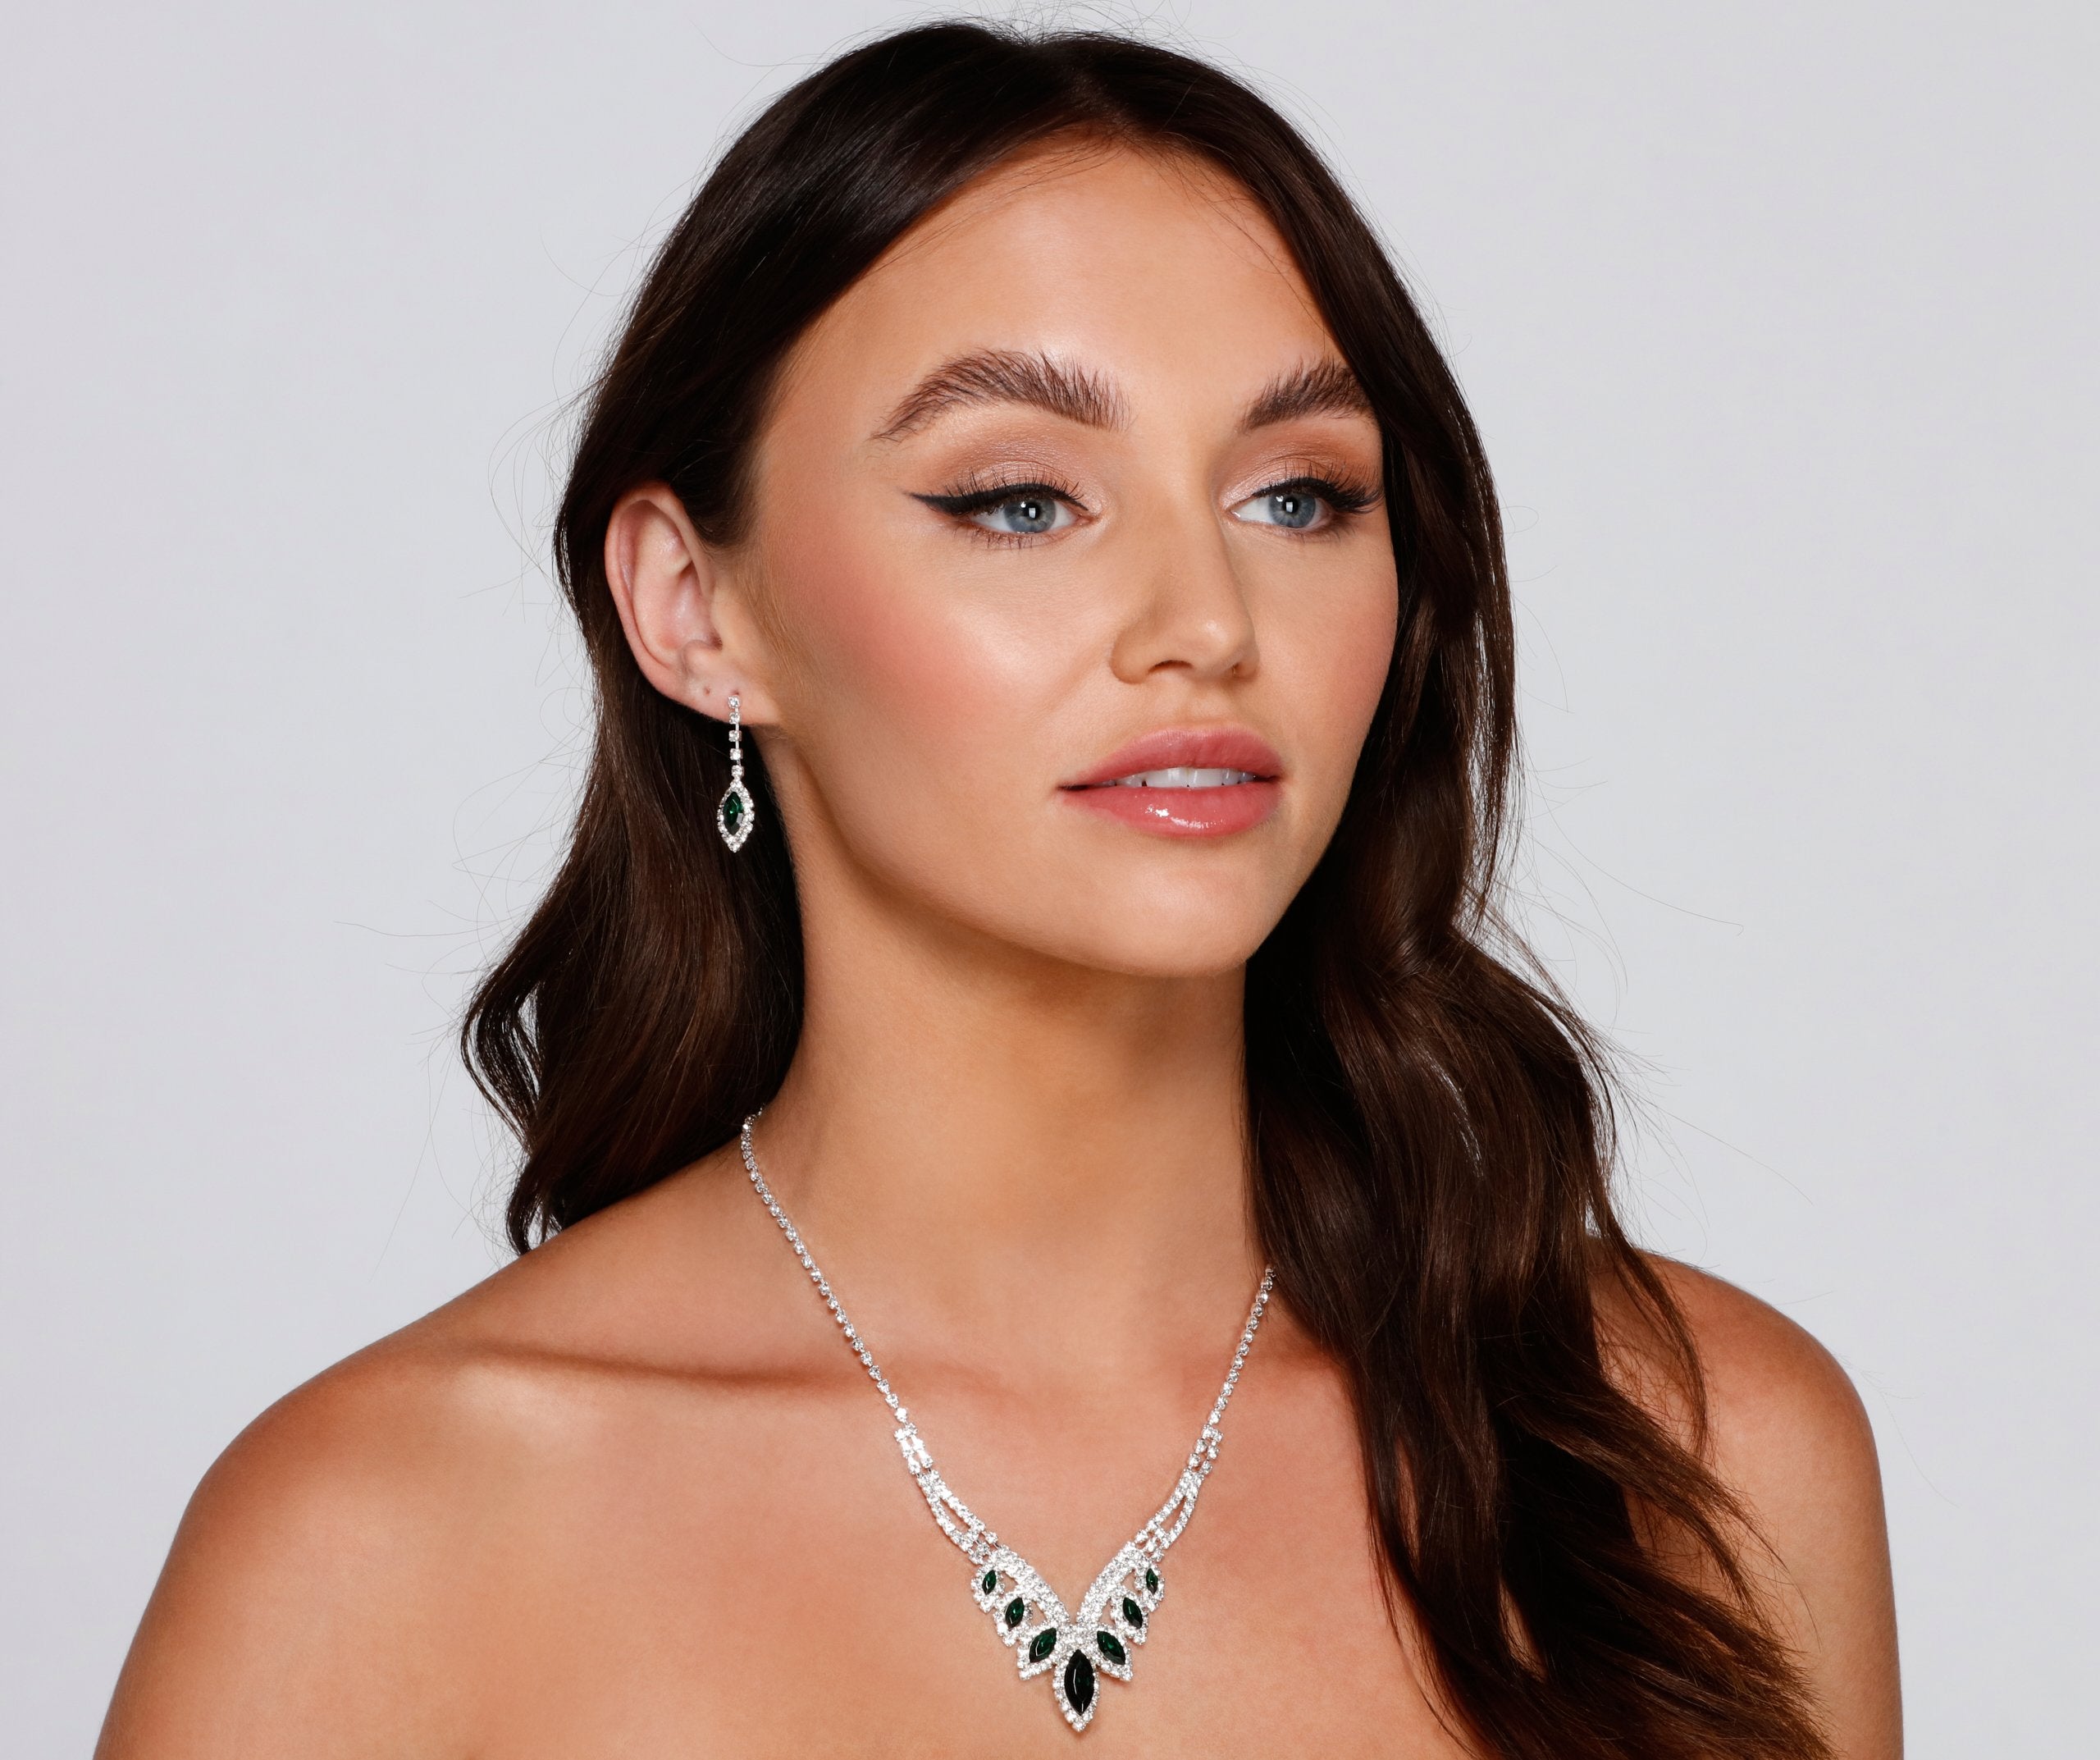 Chic Elegance Necklace And Earrings Set